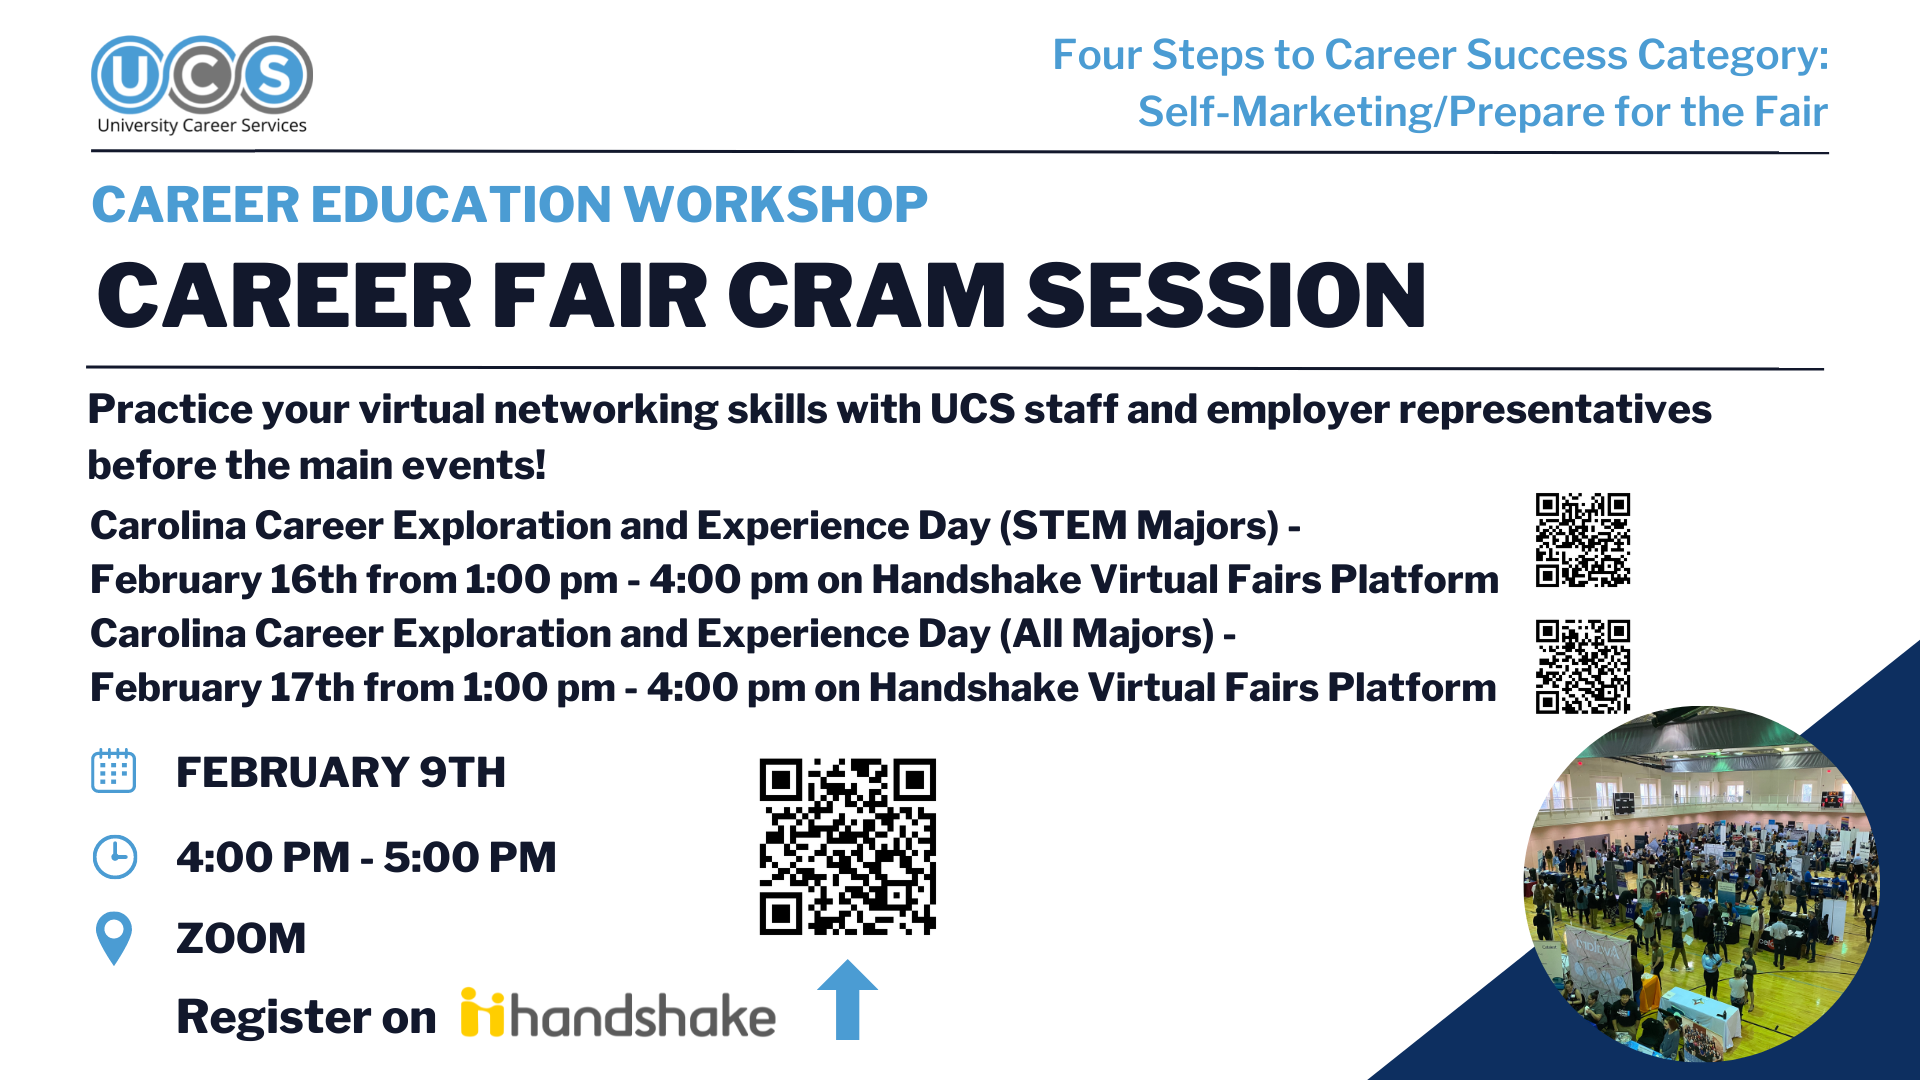 Practice your virtual networking skills with UCS staff and employer representatives before the main events!